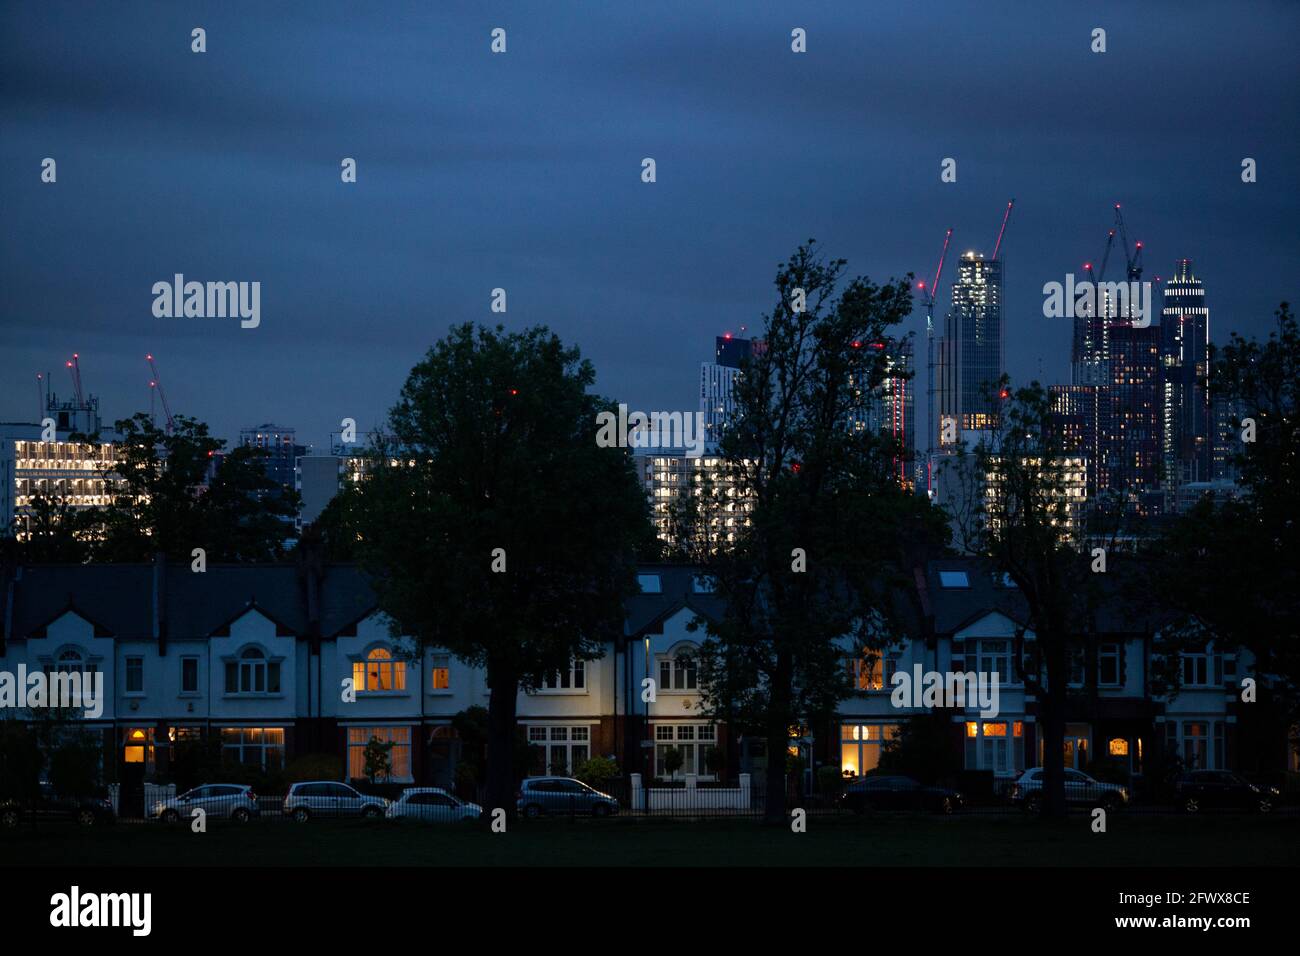 UK Weather, London, 24 May 2021: At dusk the stormy weather with heavy rain showers gives a dramatic skyline with central London's lights contrasting to the suburban houses that line Camberwell's Ruskin Park. AnnaWatson/Alamy Live News Stock Photo